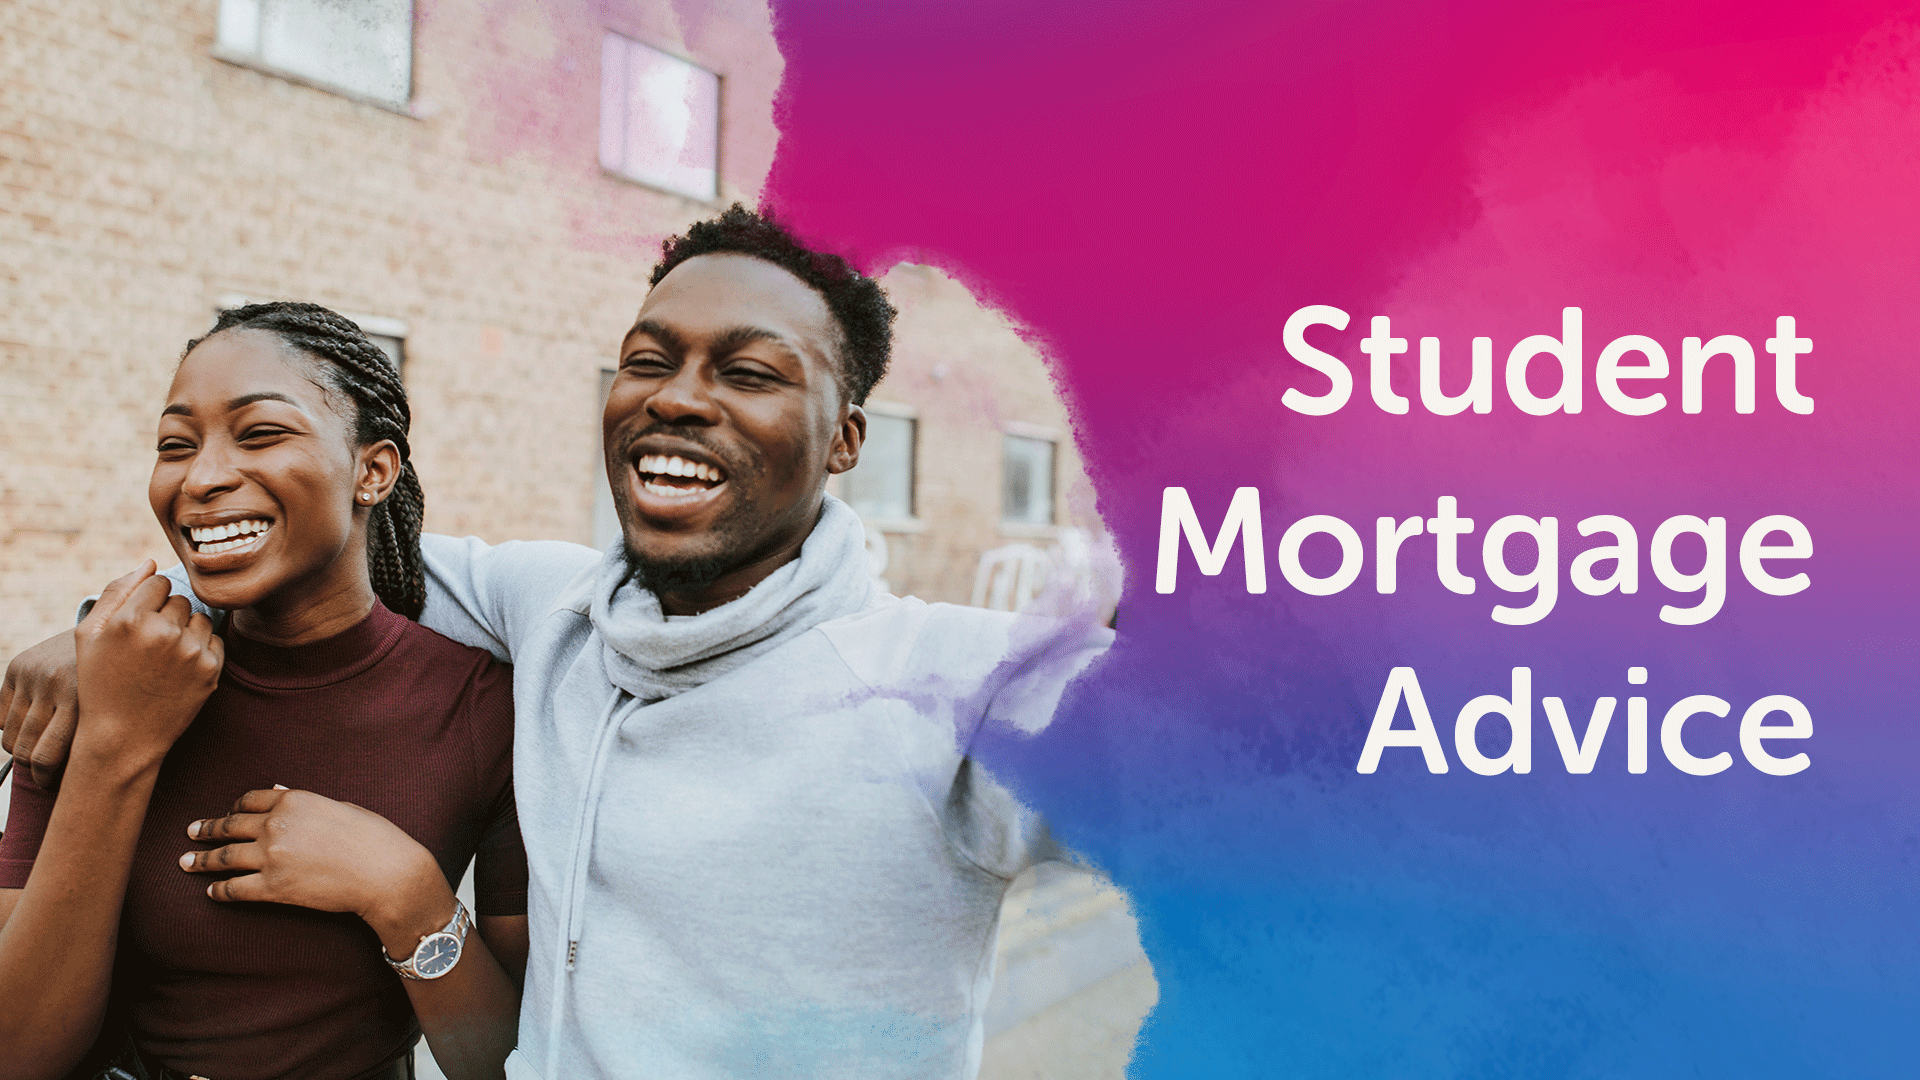 Can I get a Mortgage as a Student?